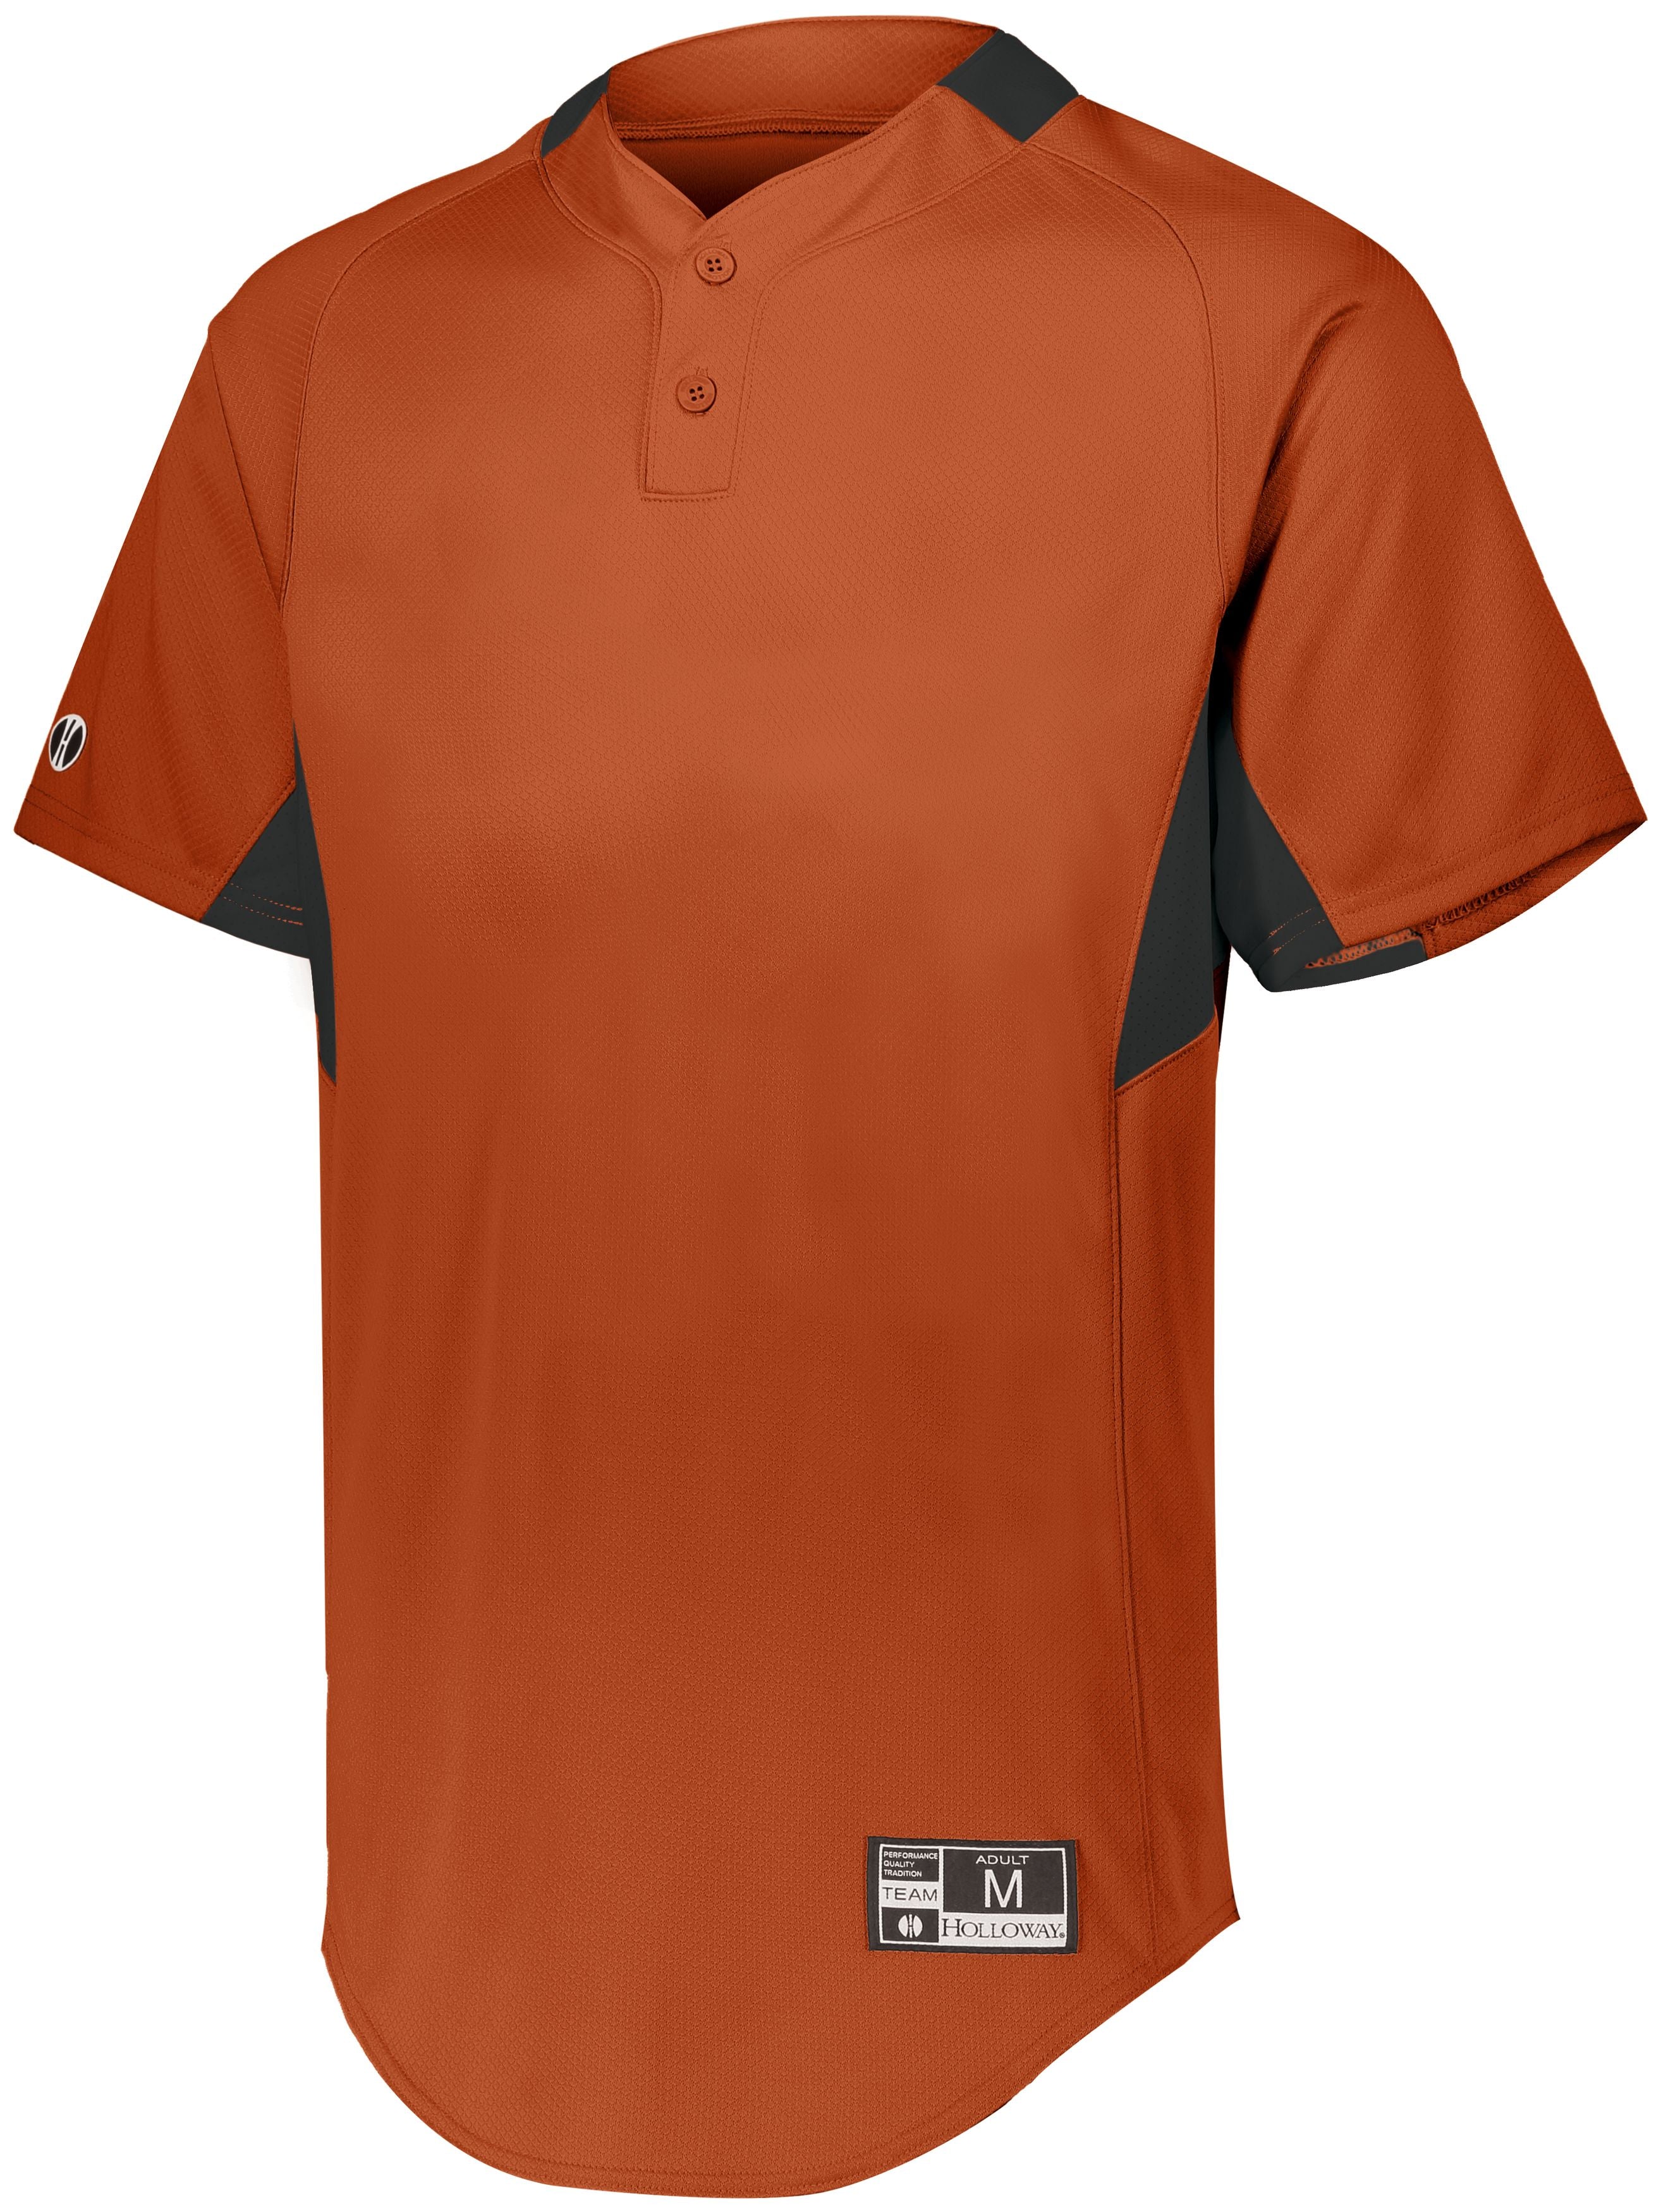 Holloway Youth  Game7 Two-Button Baseball Jersey in Orange/Black  -Part of the Youth, Youth-Jersey, Baseball, Holloway, Shirts, All-Sports, All-Sports-1 product lines at KanaleyCreations.com